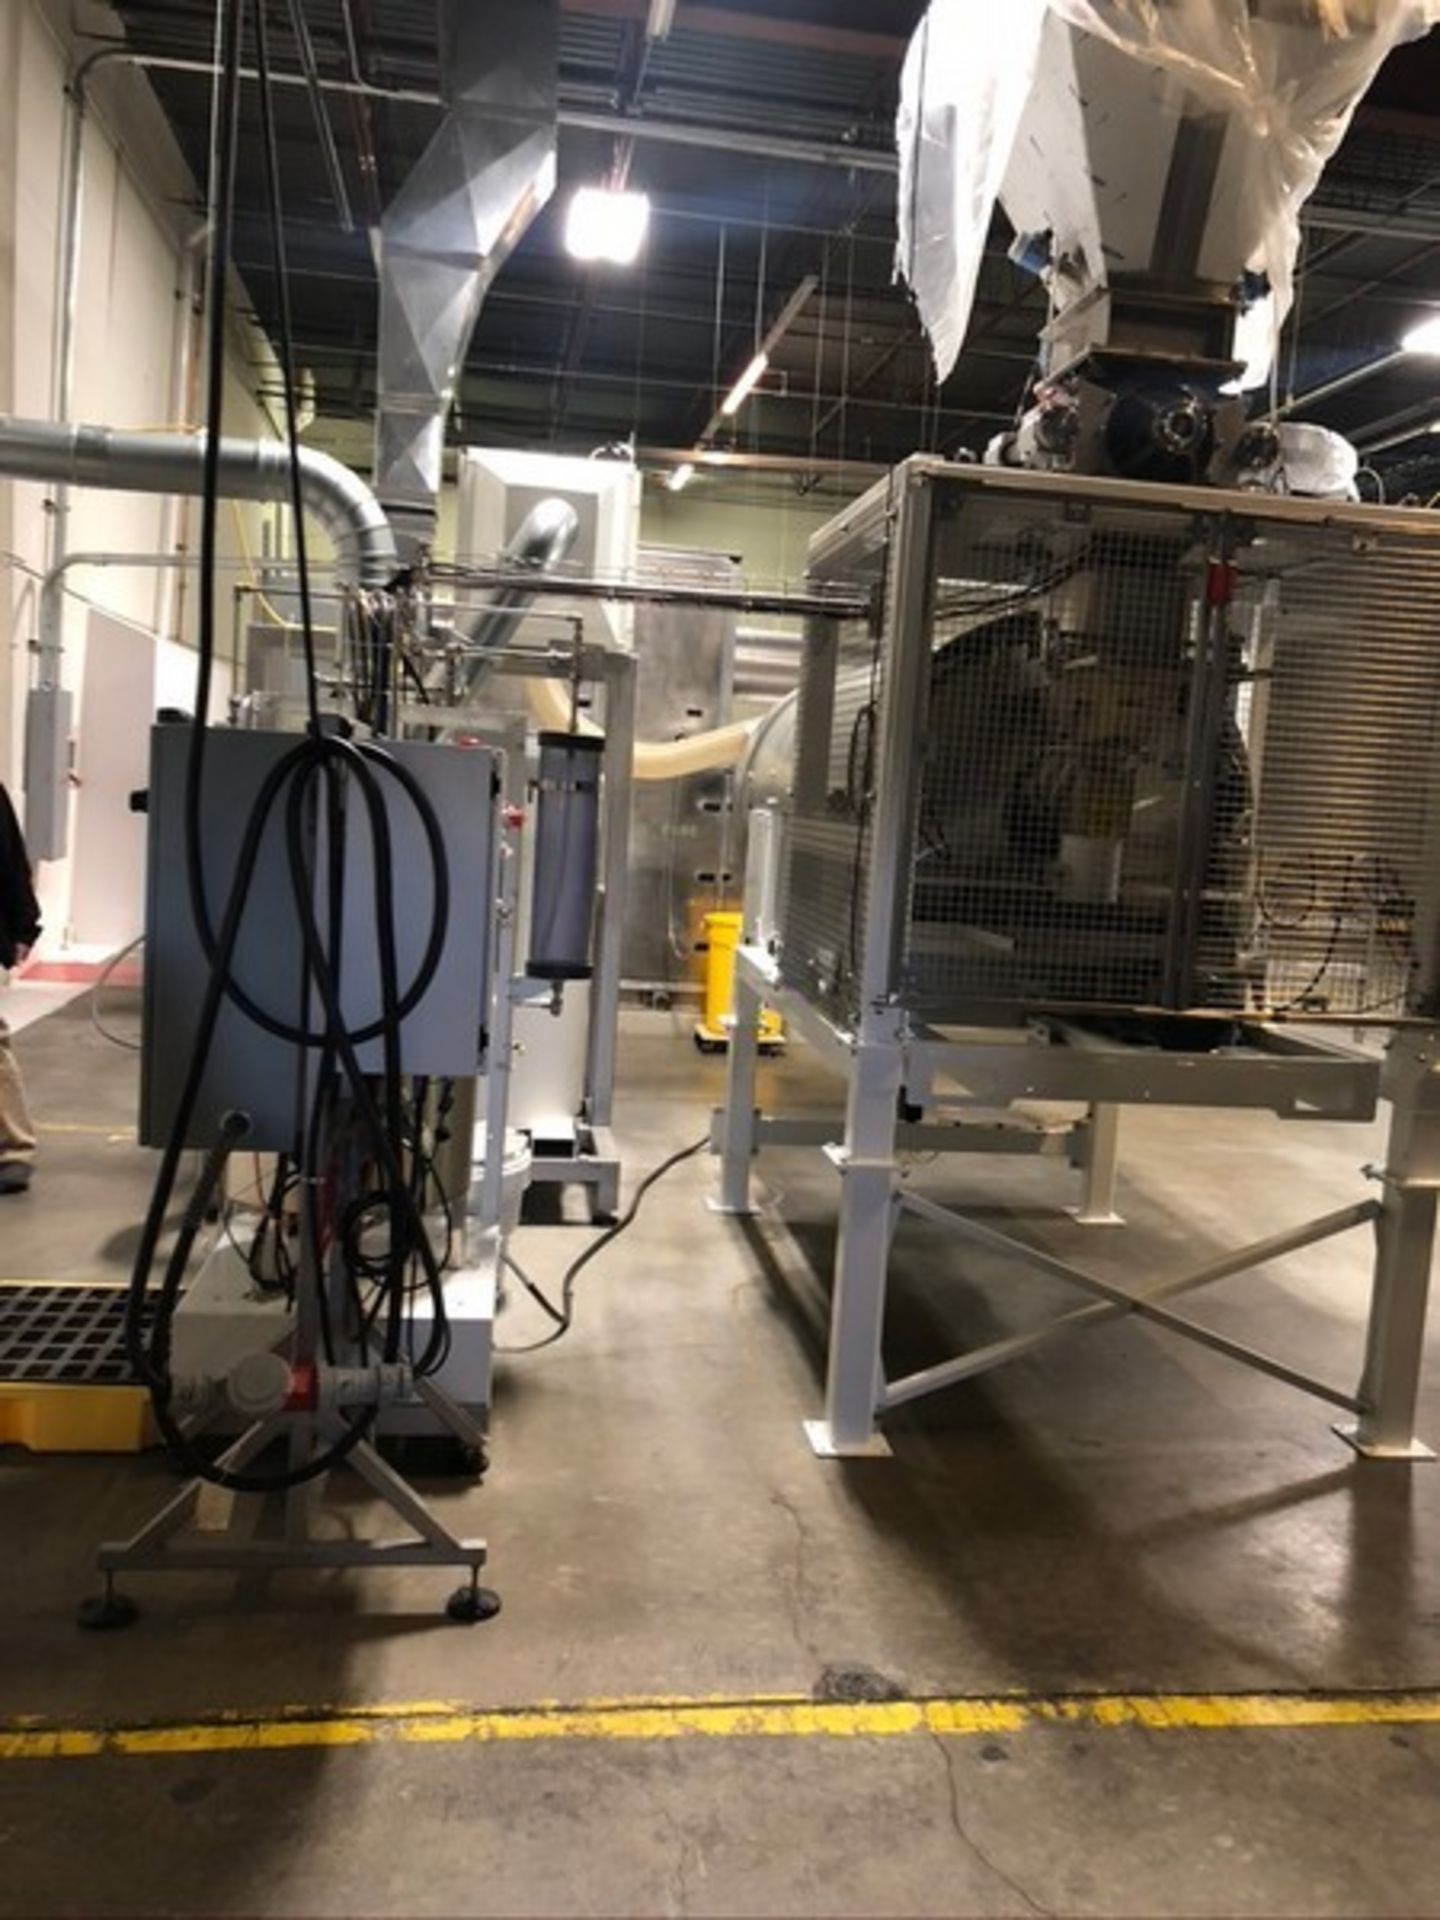 2018 Neo-Pure Seed, Nut, Grain & Hemp Pasteurizing and Drying System, - Image 2 of 108